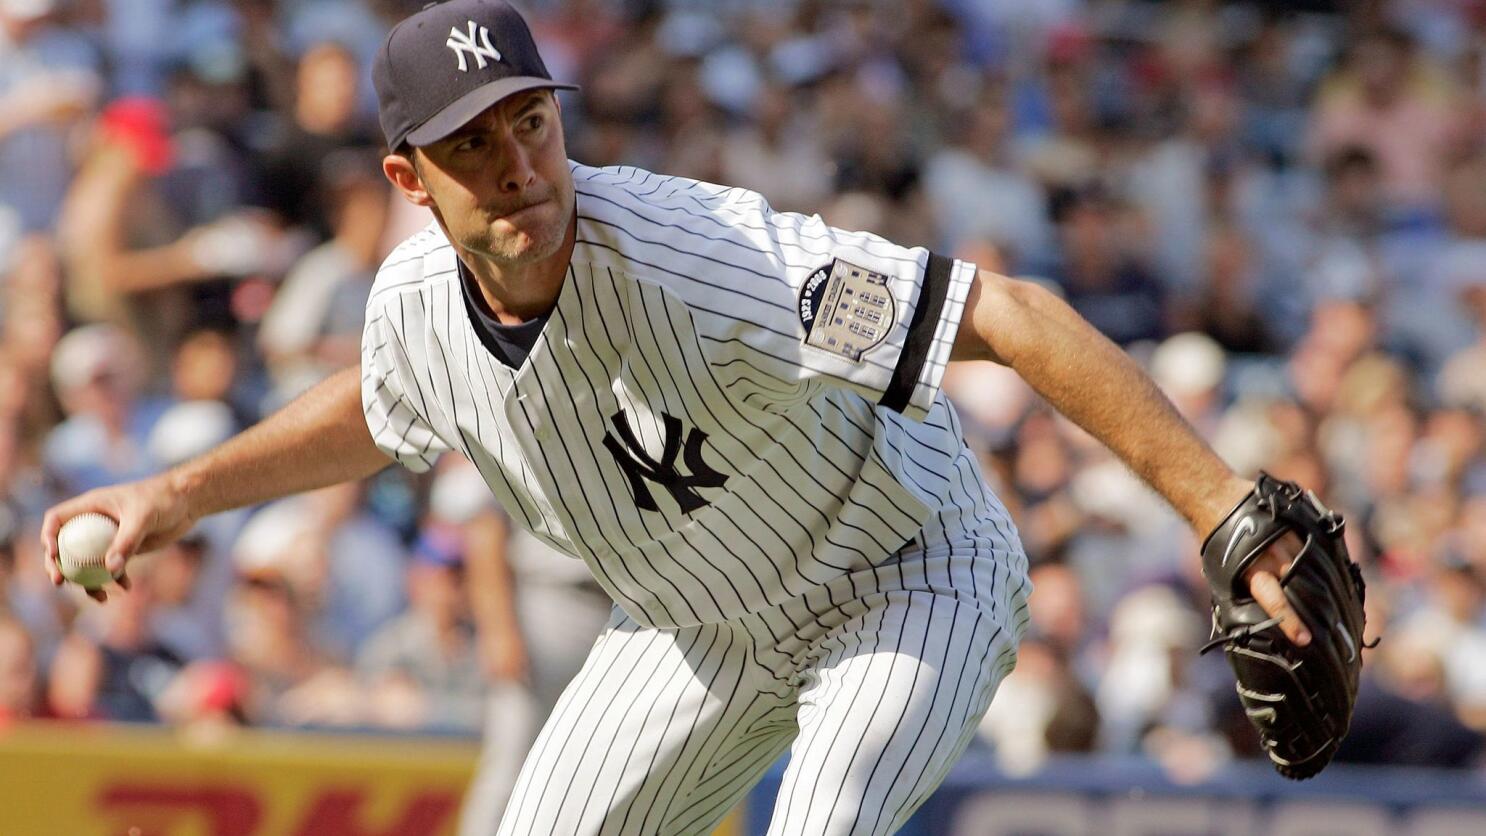 Case study: Mike Mussina's Hall credentials - The San Diego Union-Tribune